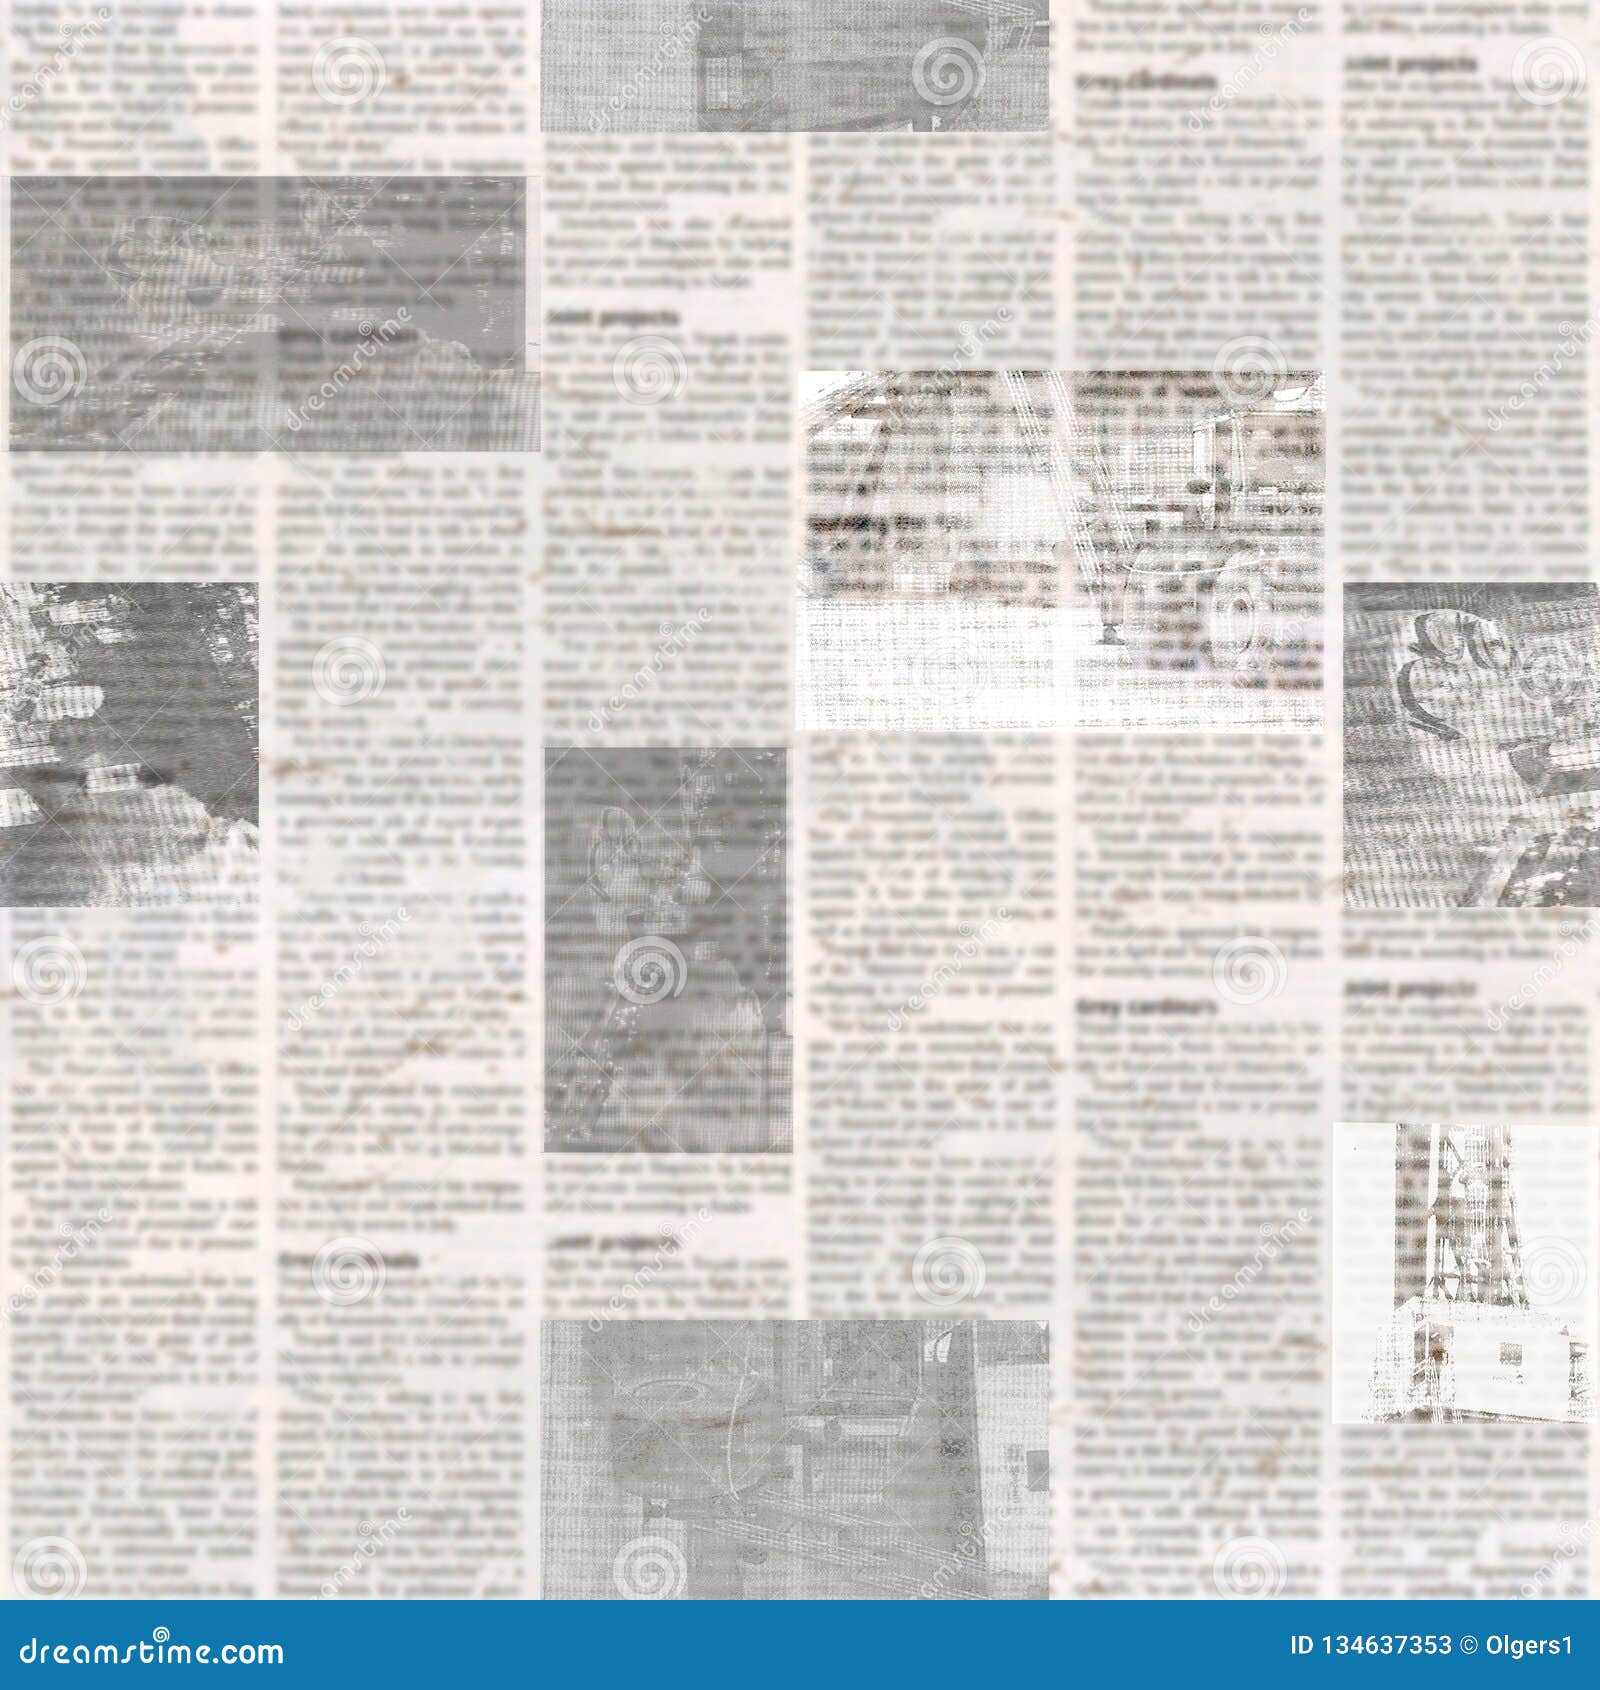 40 845 Newspaper Background Photos Free Royalty Free Stock Photos From Dreamstime